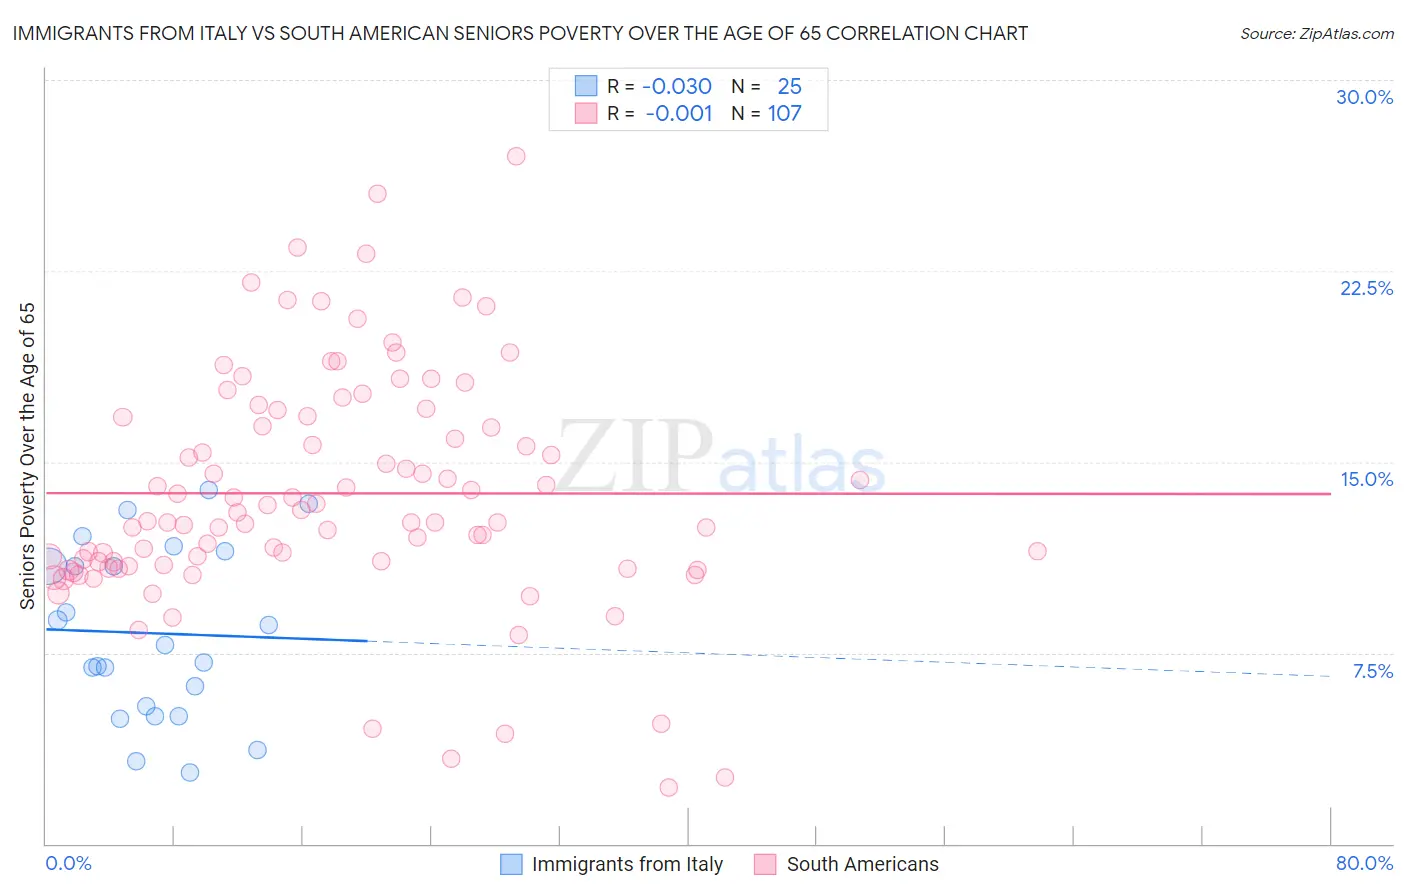 Immigrants from Italy vs South American Seniors Poverty Over the Age of 65